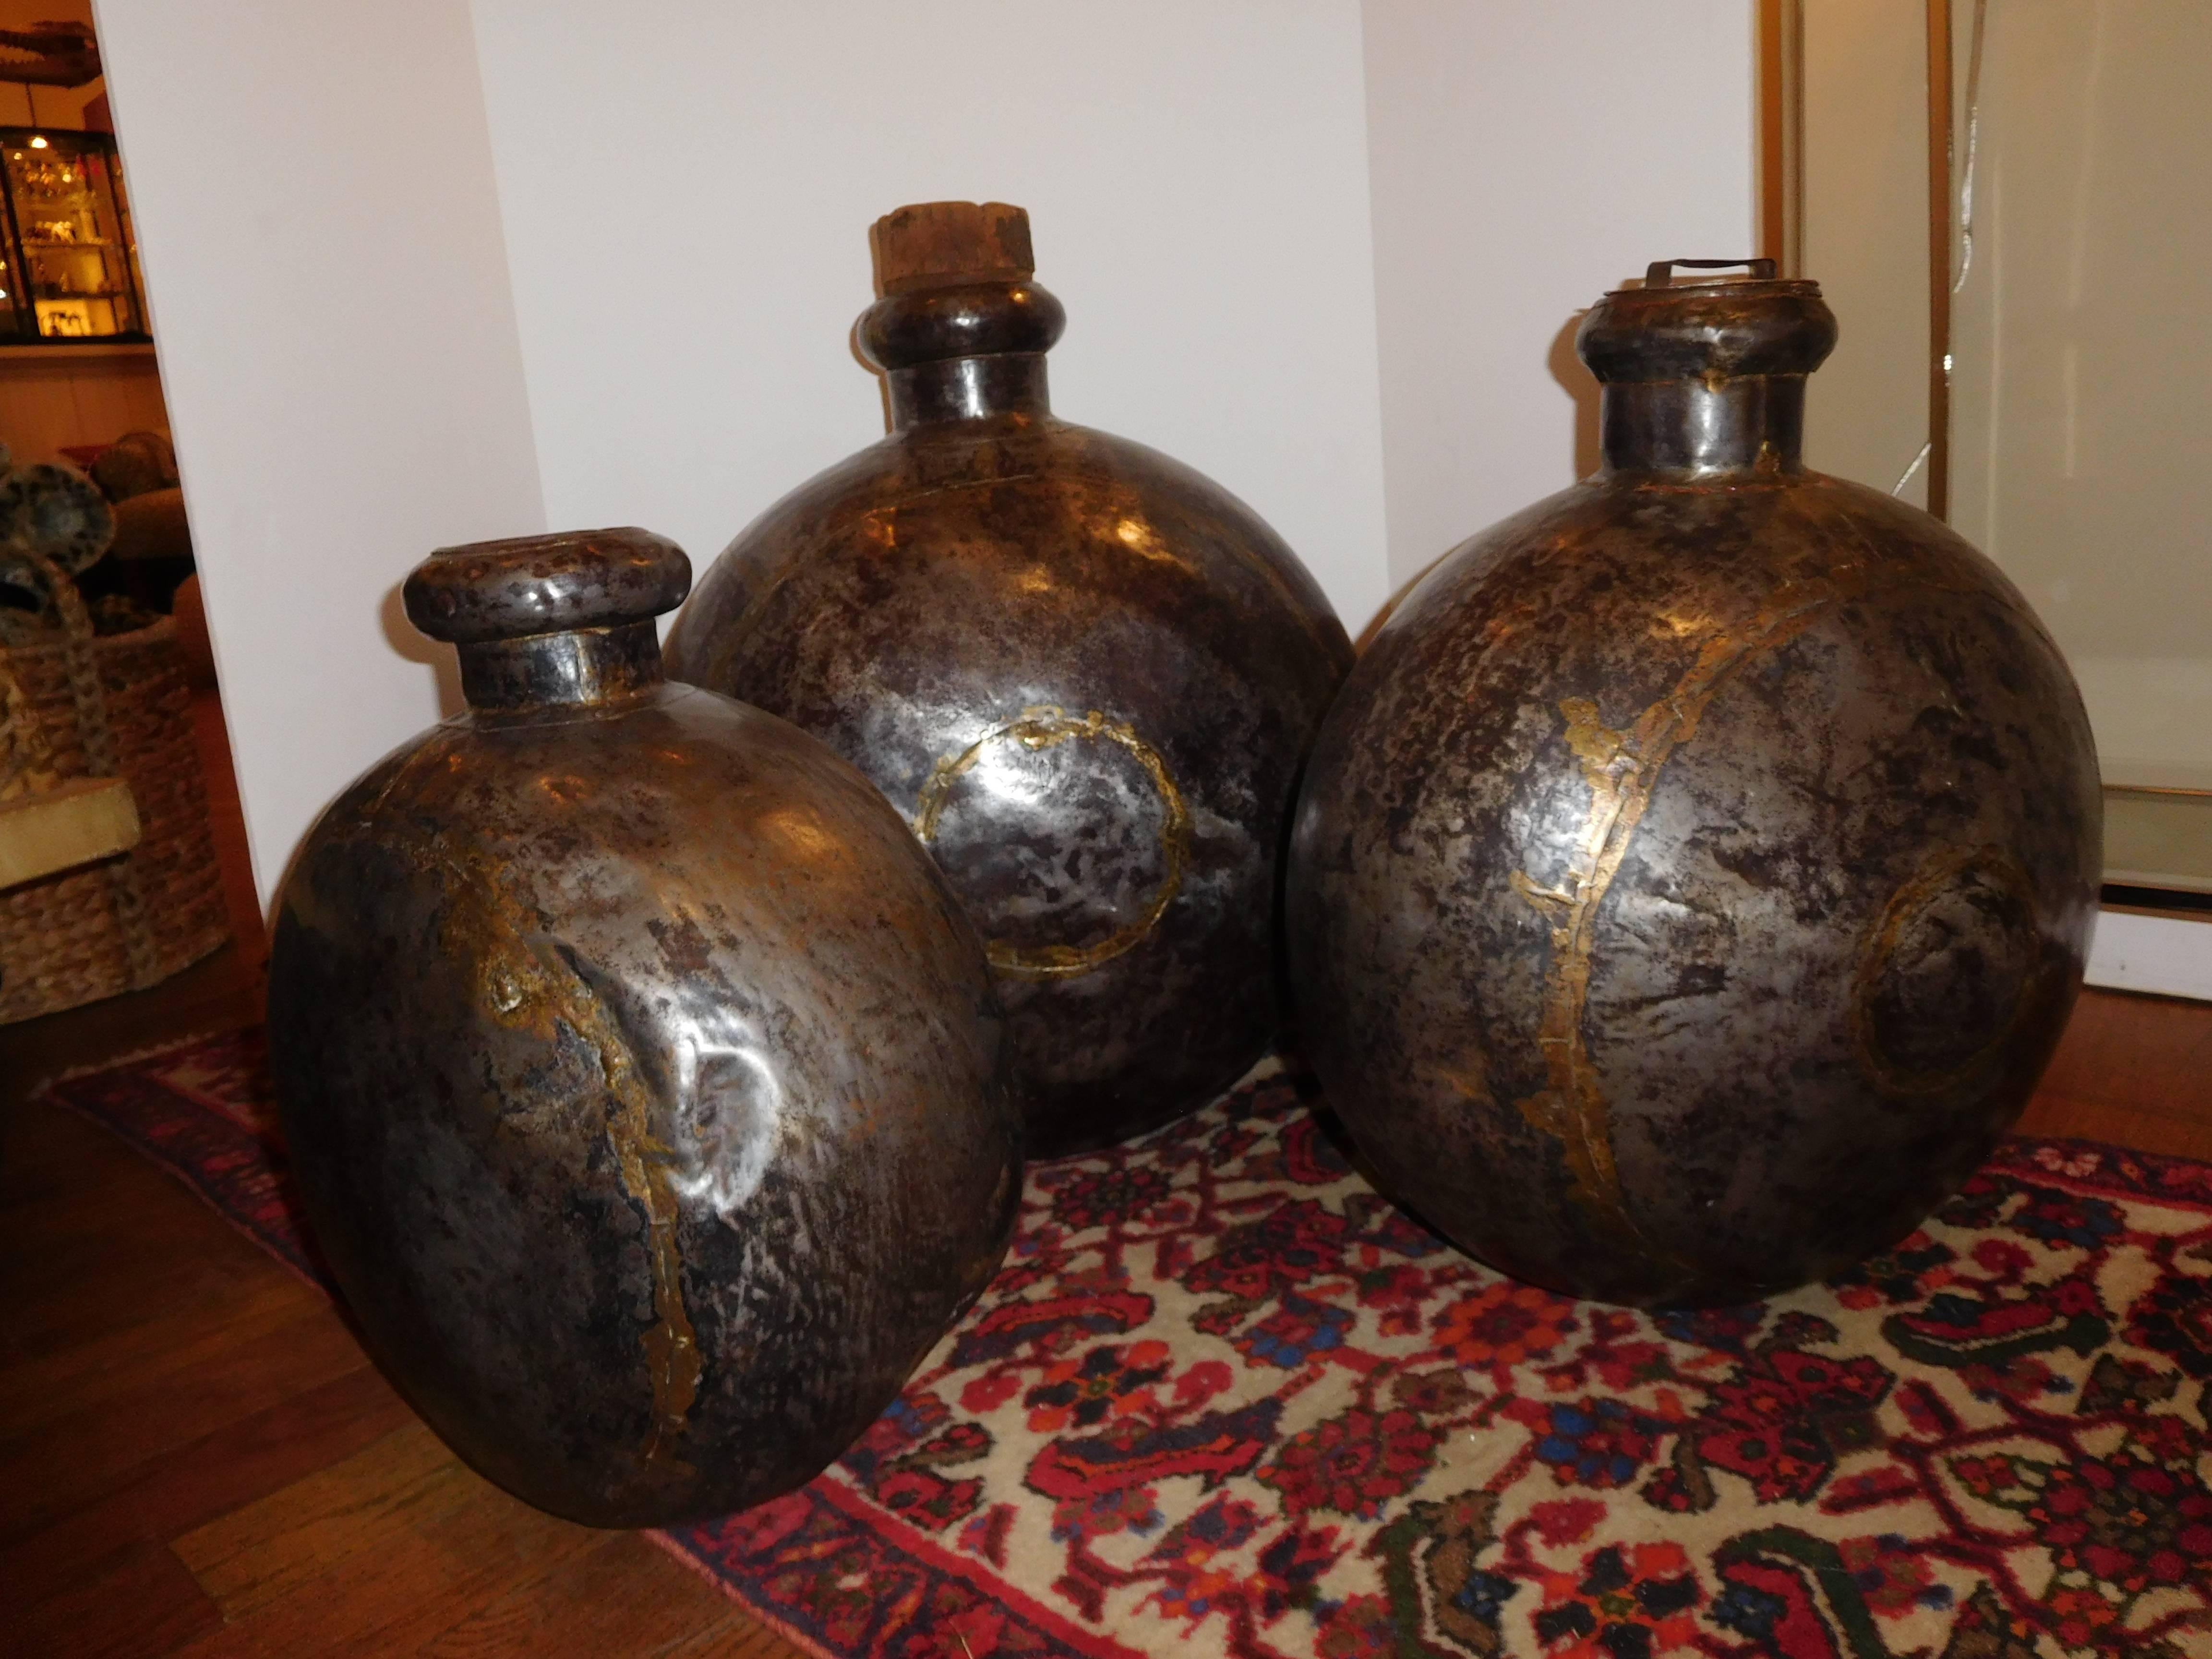 The three sizes are 26 inches high, 21 inches high and 18 inches high. The largest measurement is listed below. The tree copper vessels have a wonderful natural patina. One top is original (copper handle) one is cork and the other is without, some